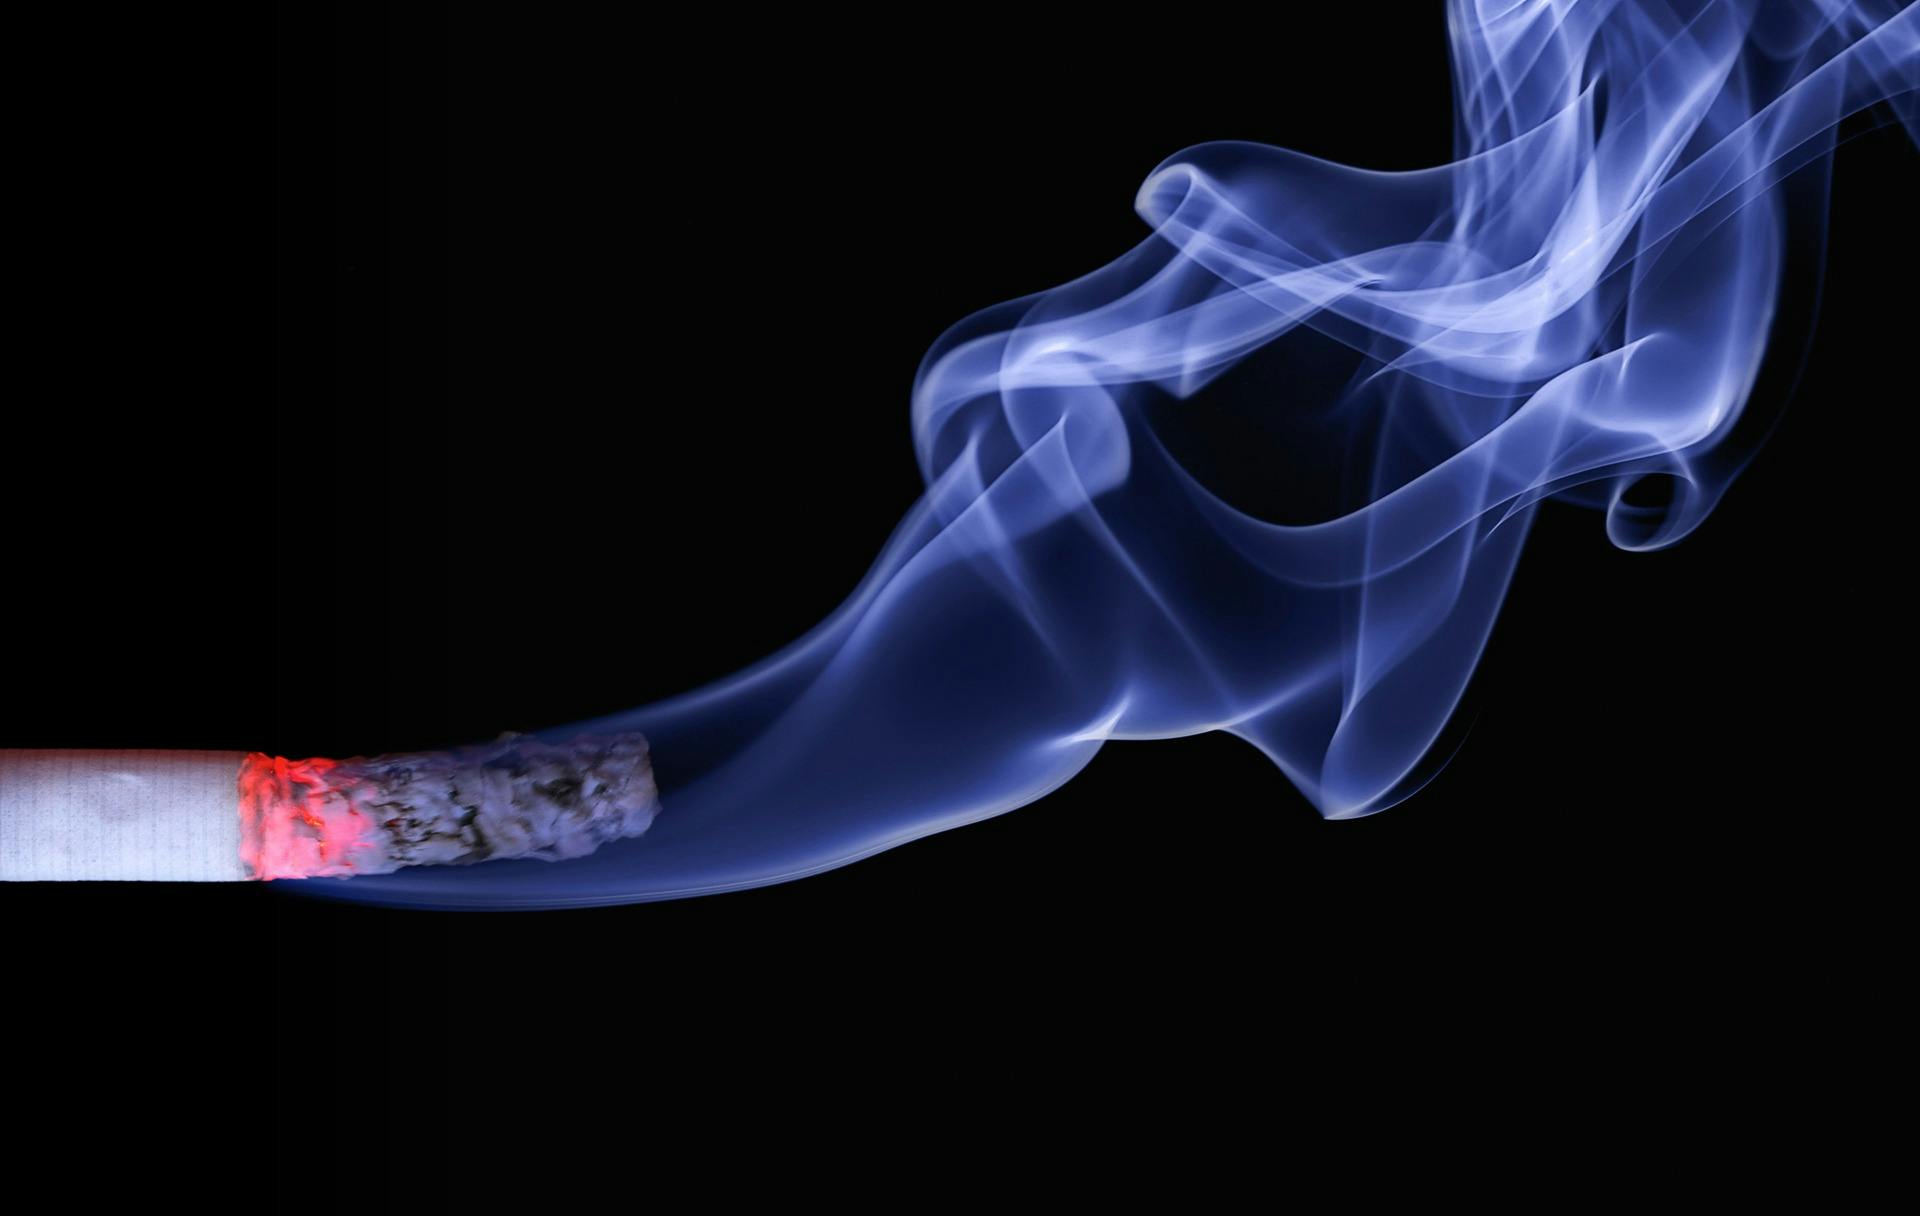 Negative Effects of Smoking on Mental and Physical Health